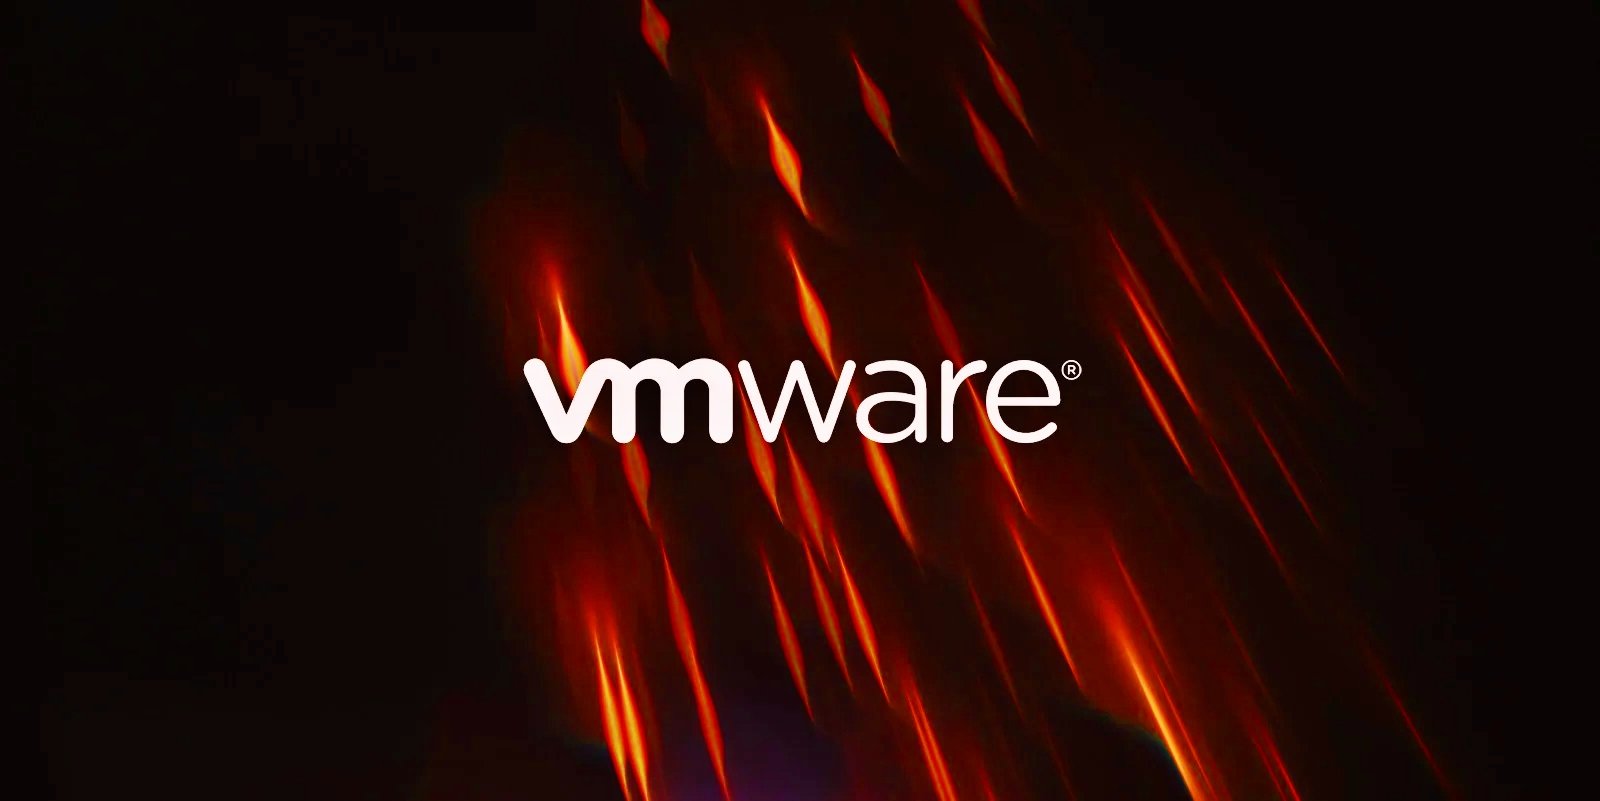 New Python malware backdoors VMware ESXi servers for remote access